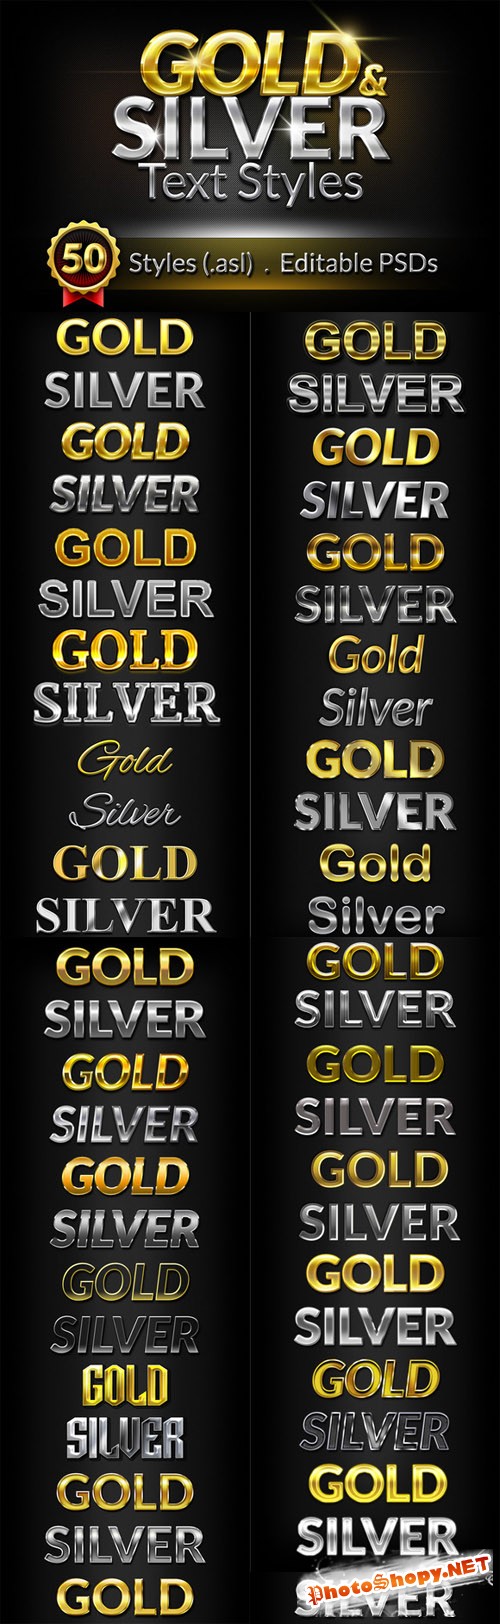 50 Gold & Silver Text Styles - CM 46314